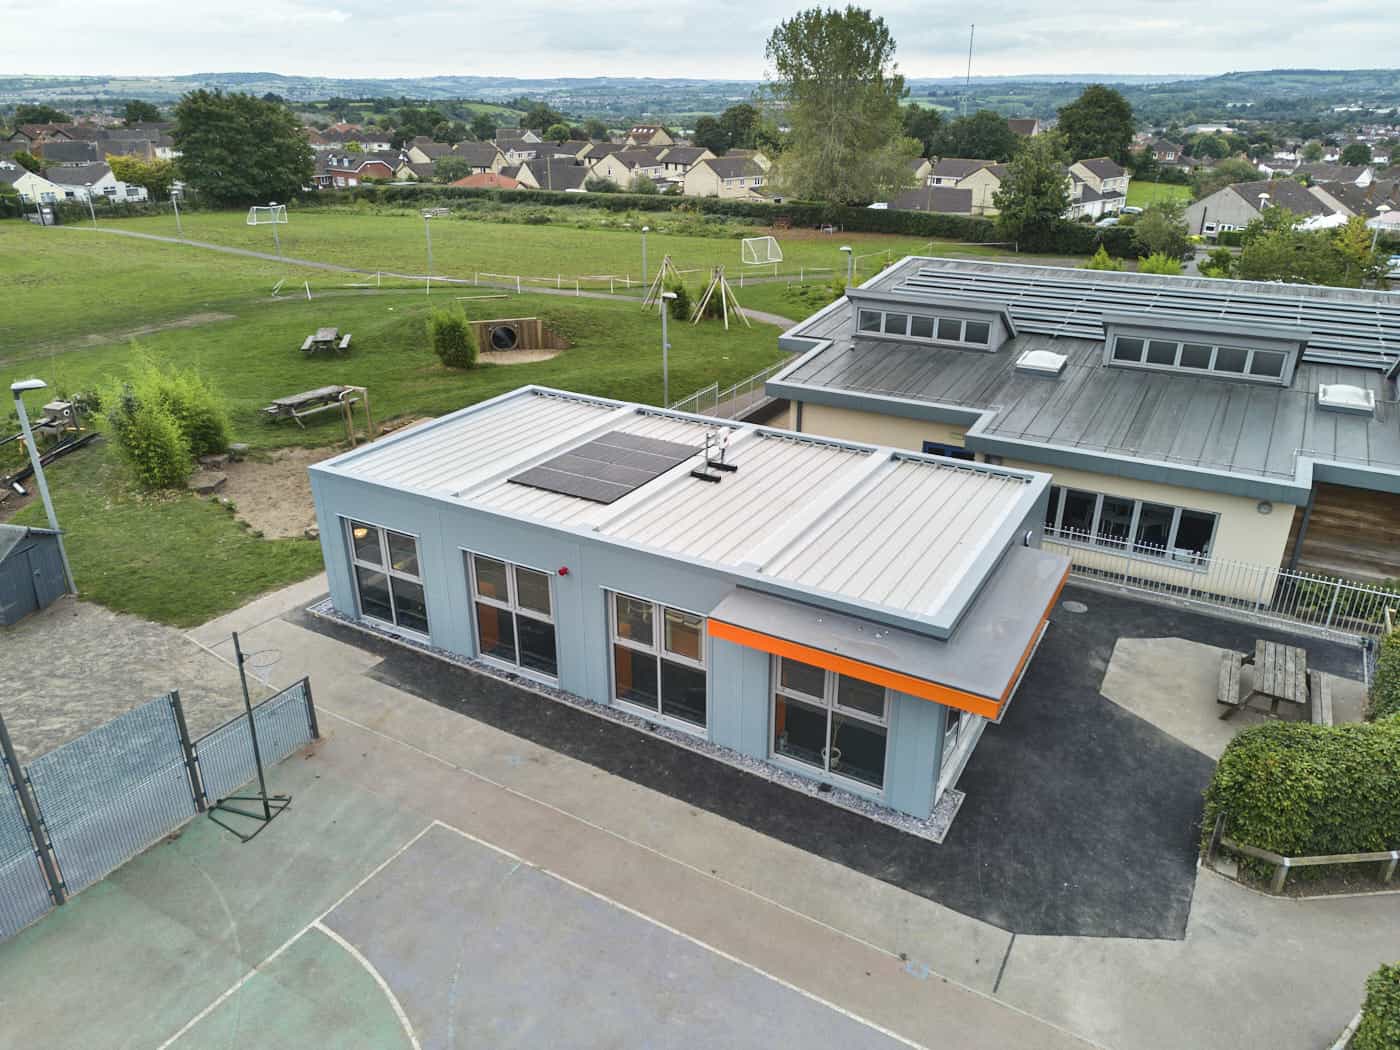 Outside shot of modular education building built for Beacon Rise Primary School. A modular unit creating more office space, just outside of the school building.